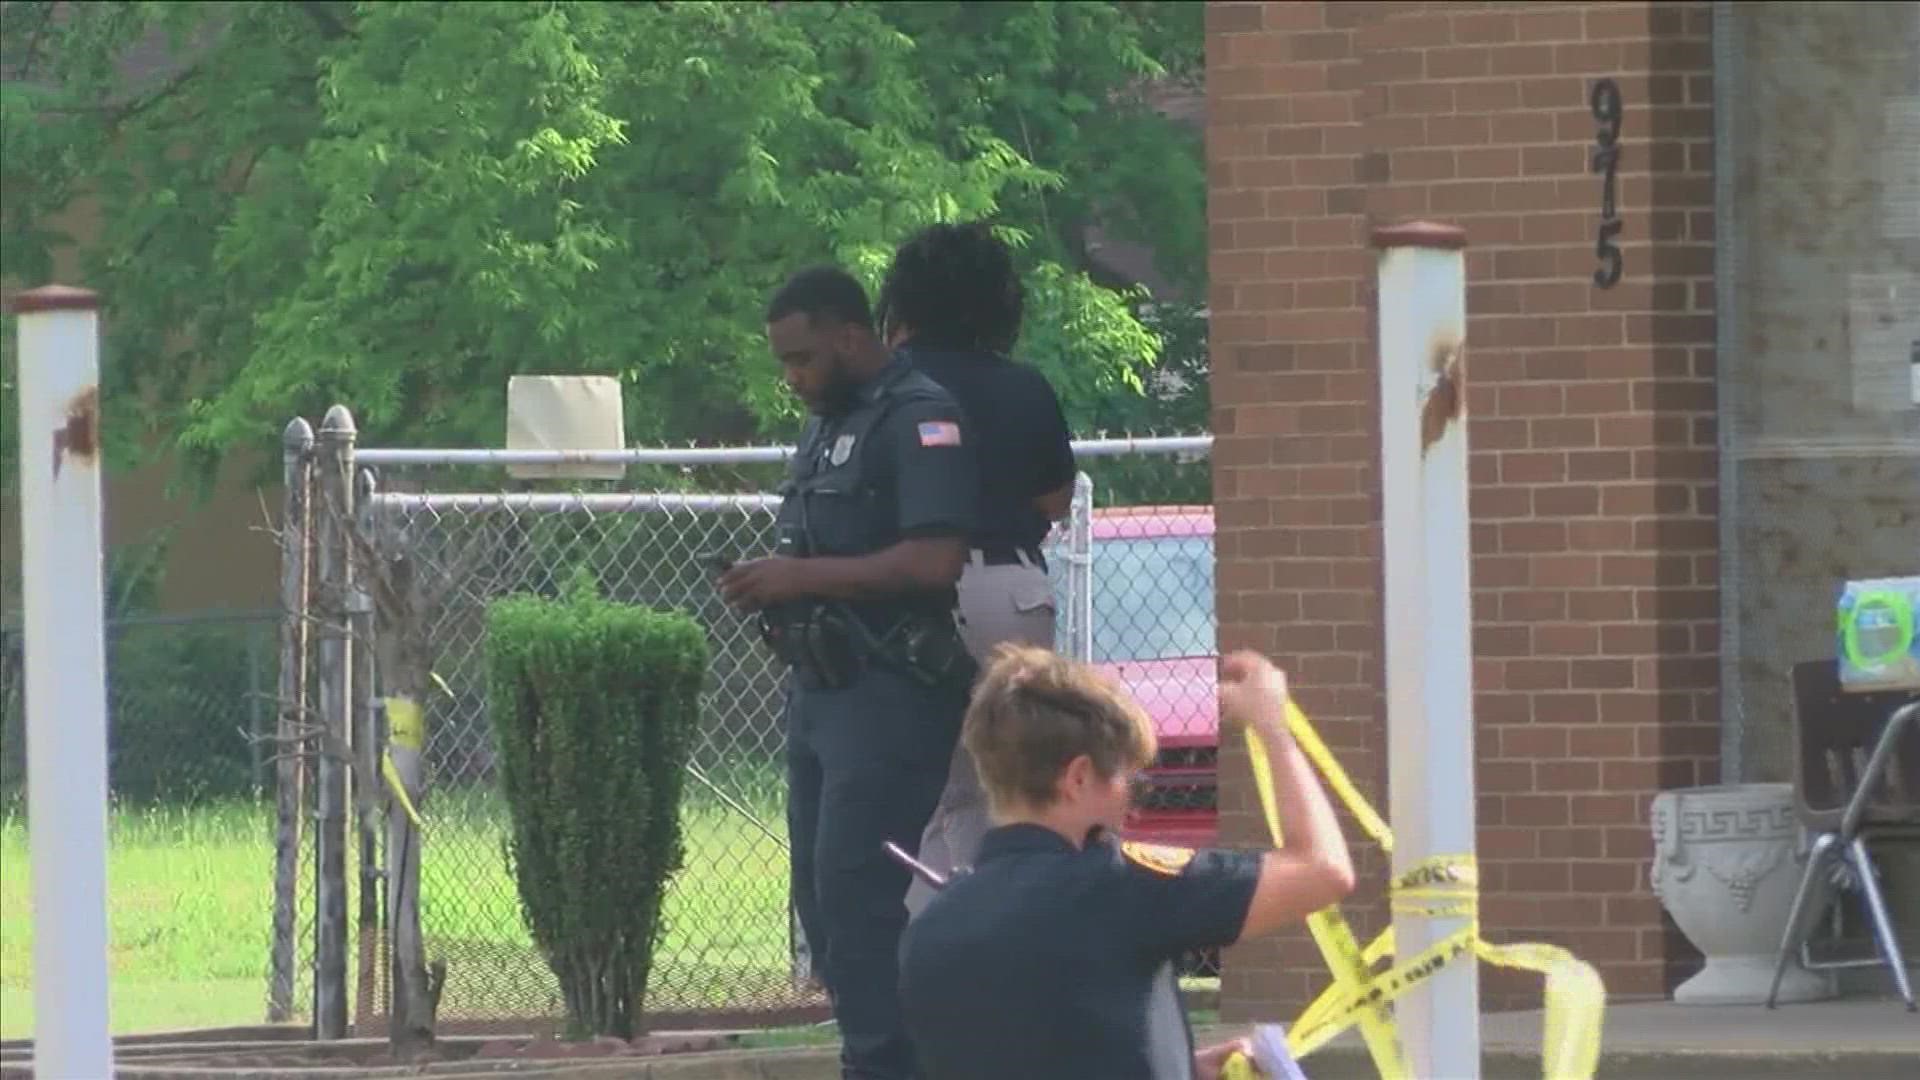 Just after 2:30 p.m. Thursday, officers responded after a concerned woman called in about a child left in an SUV near the Education is the Key Children's Center in t